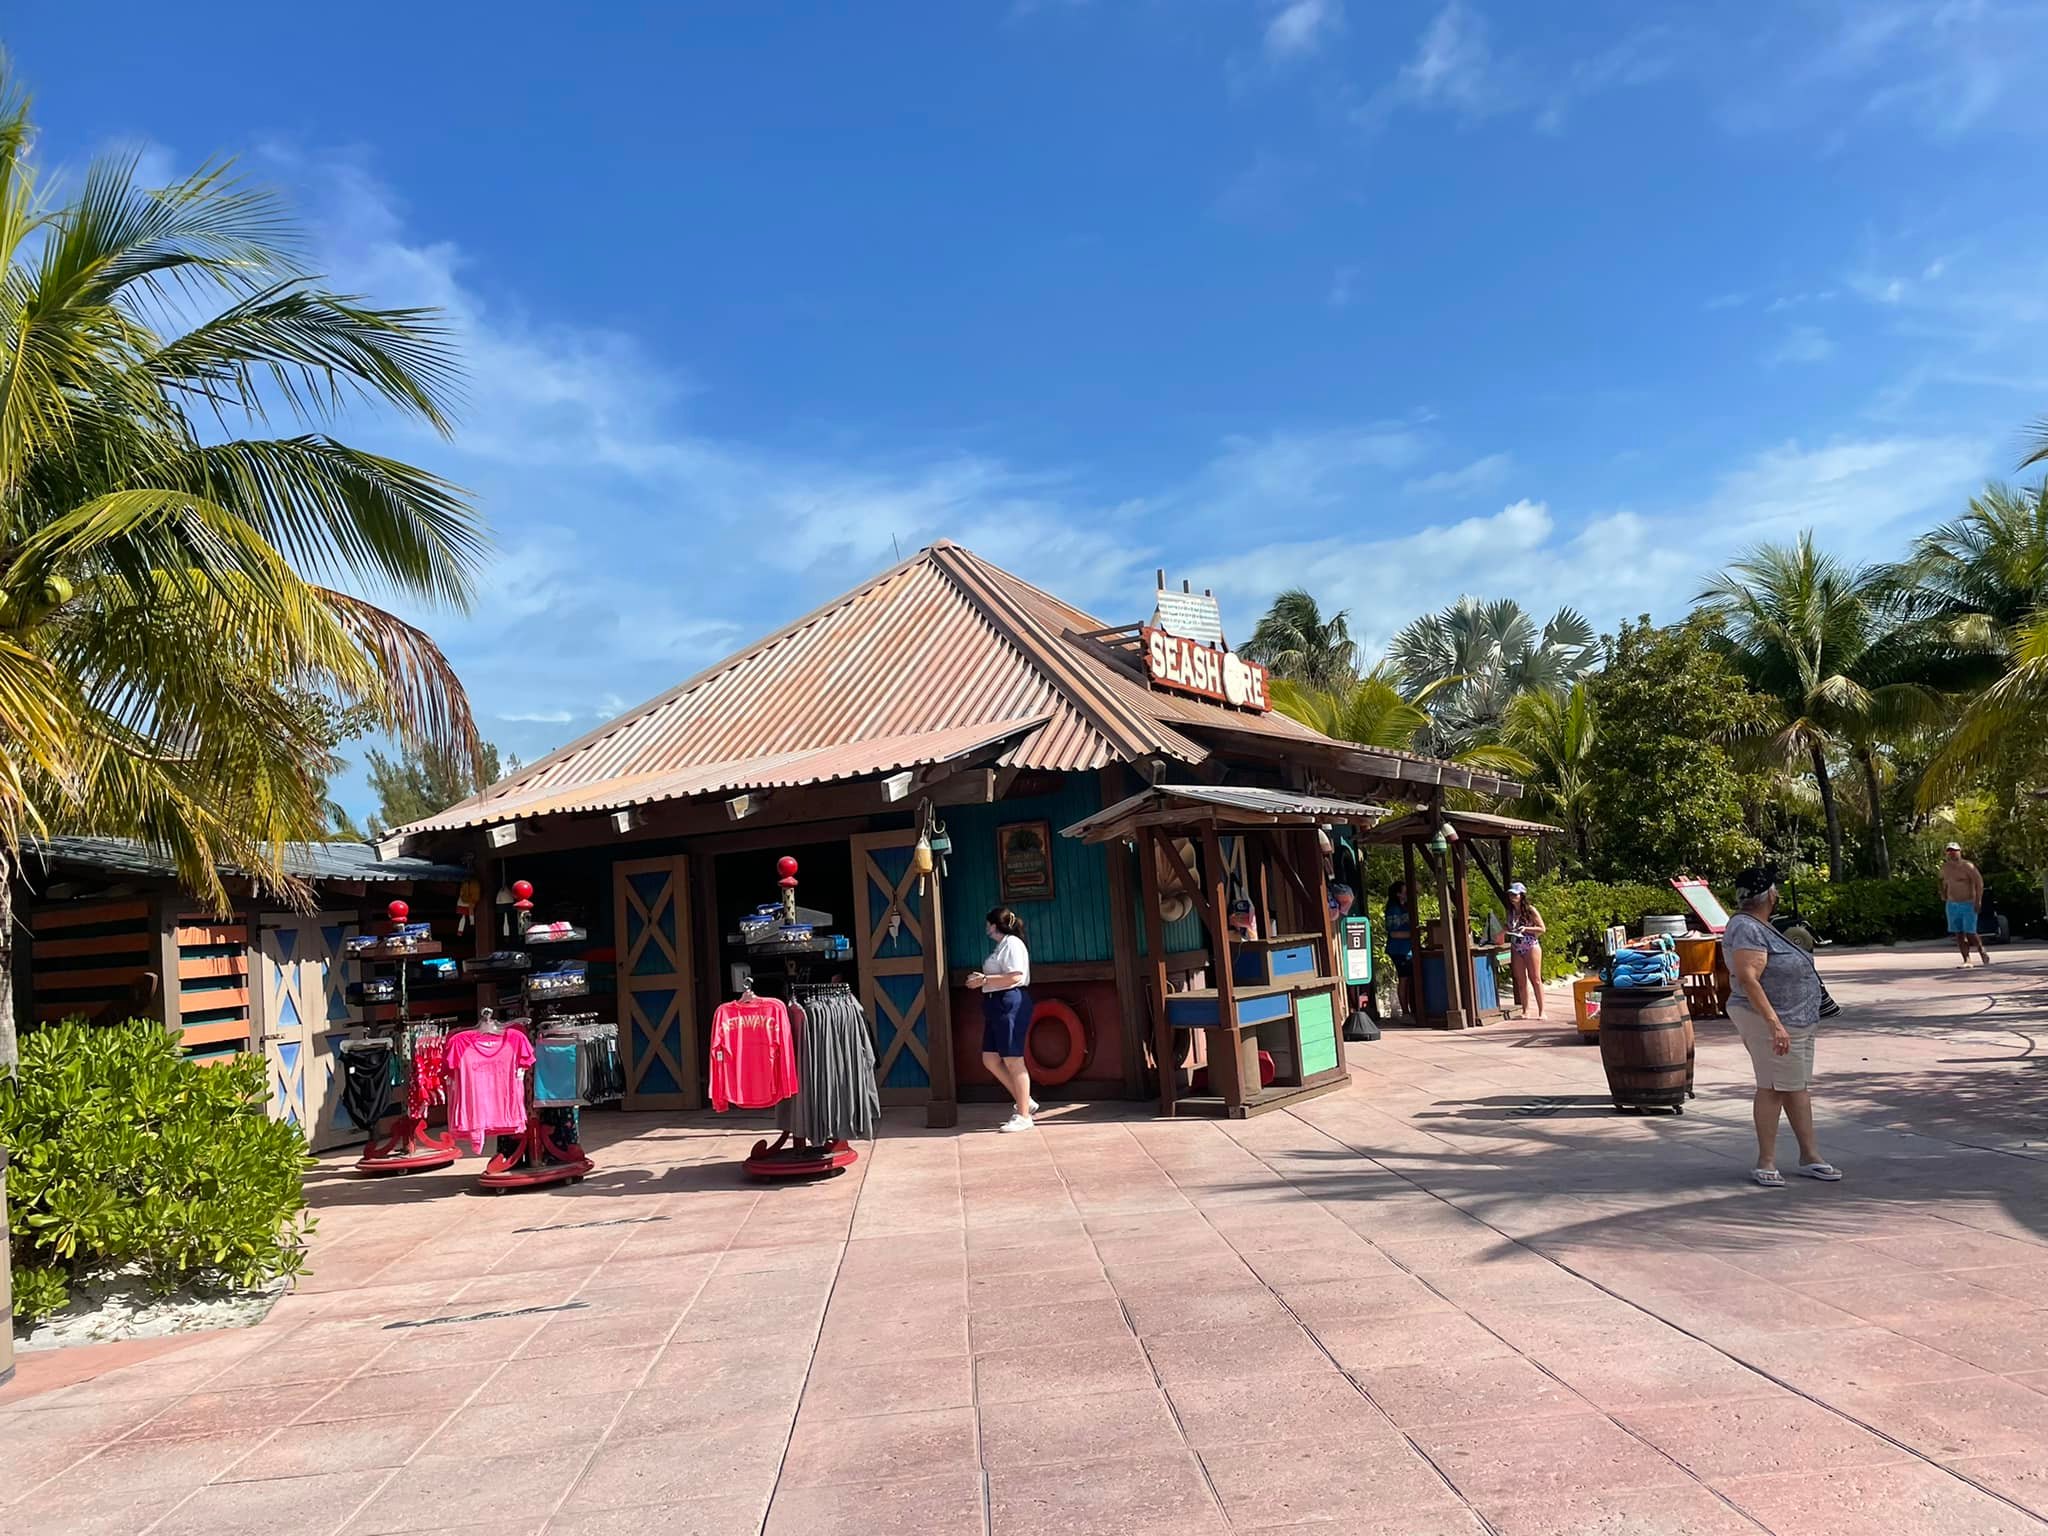 disney cruises with 2 stops at castaway cay